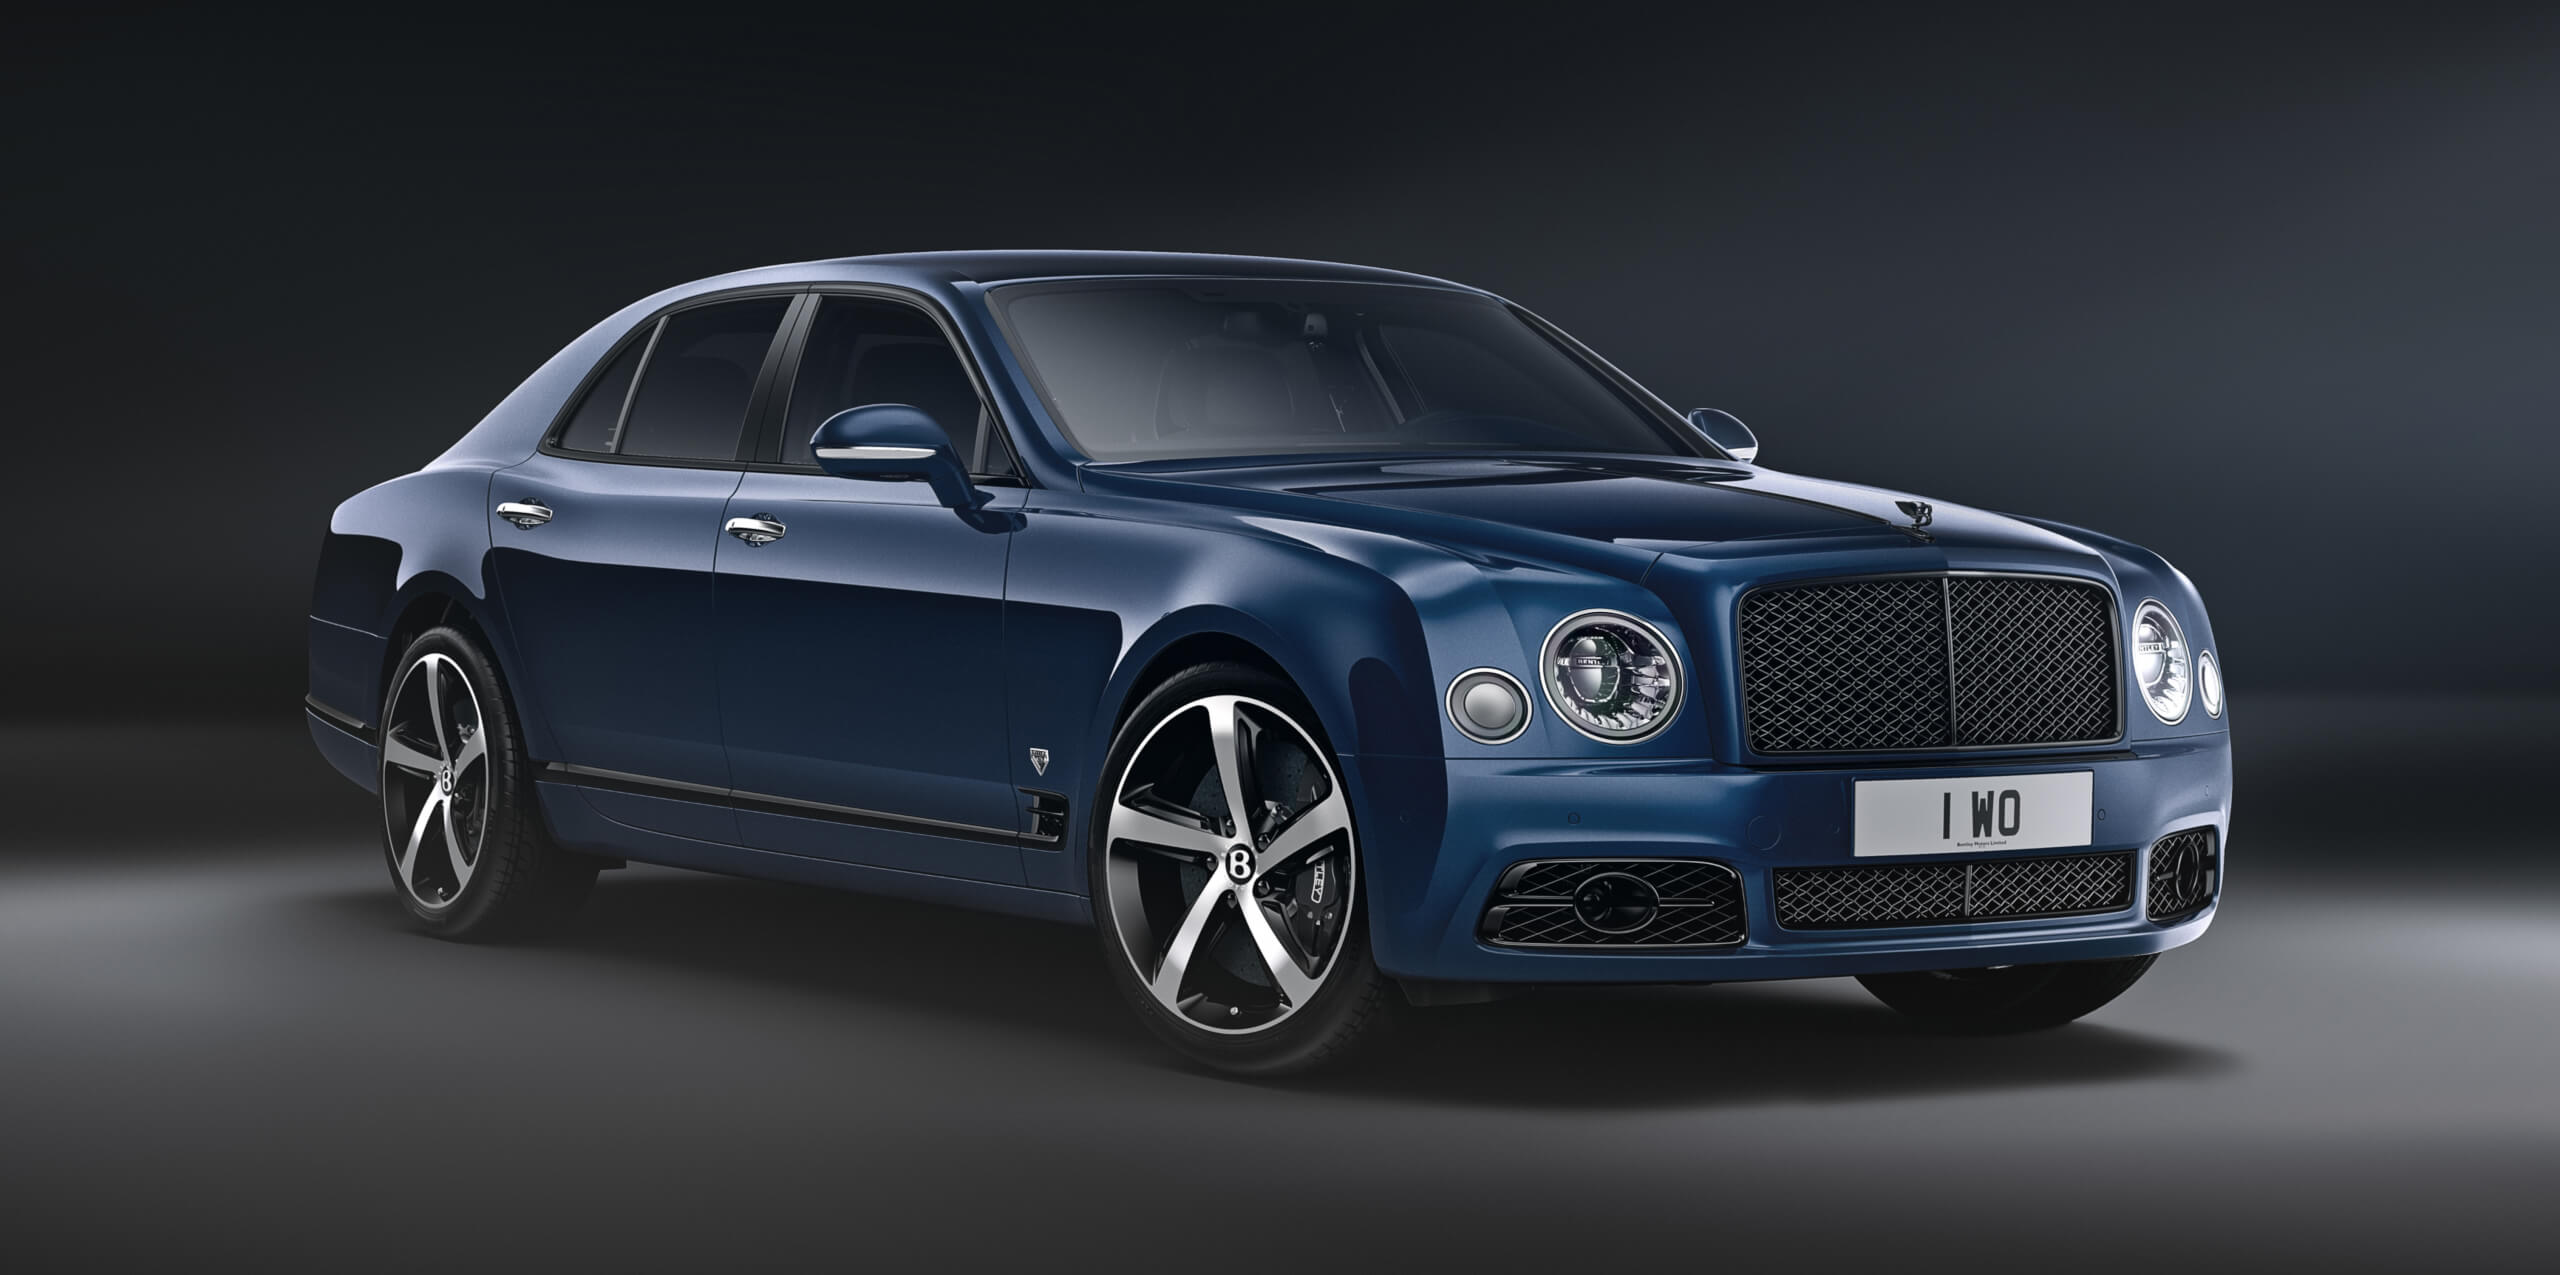 Bentley ends Mulsanne production with a Mulsanne 675 Edition.